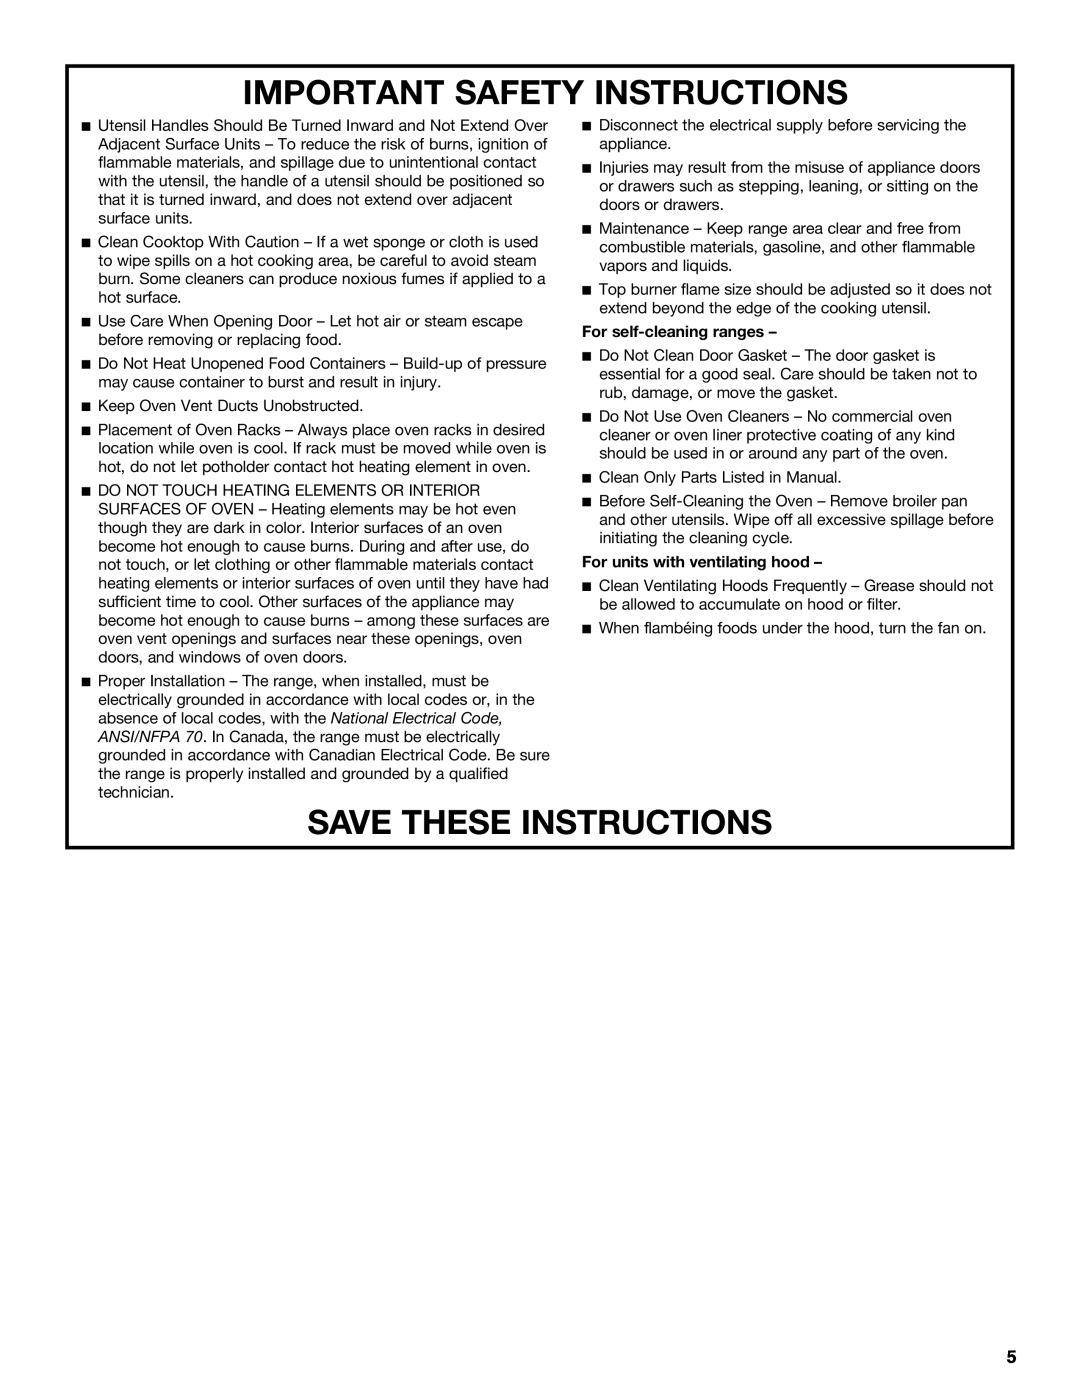 Jenn-Air JDRP430 manual Important Safety Instructions, Save These Instructions, For self-cleaning ranges 